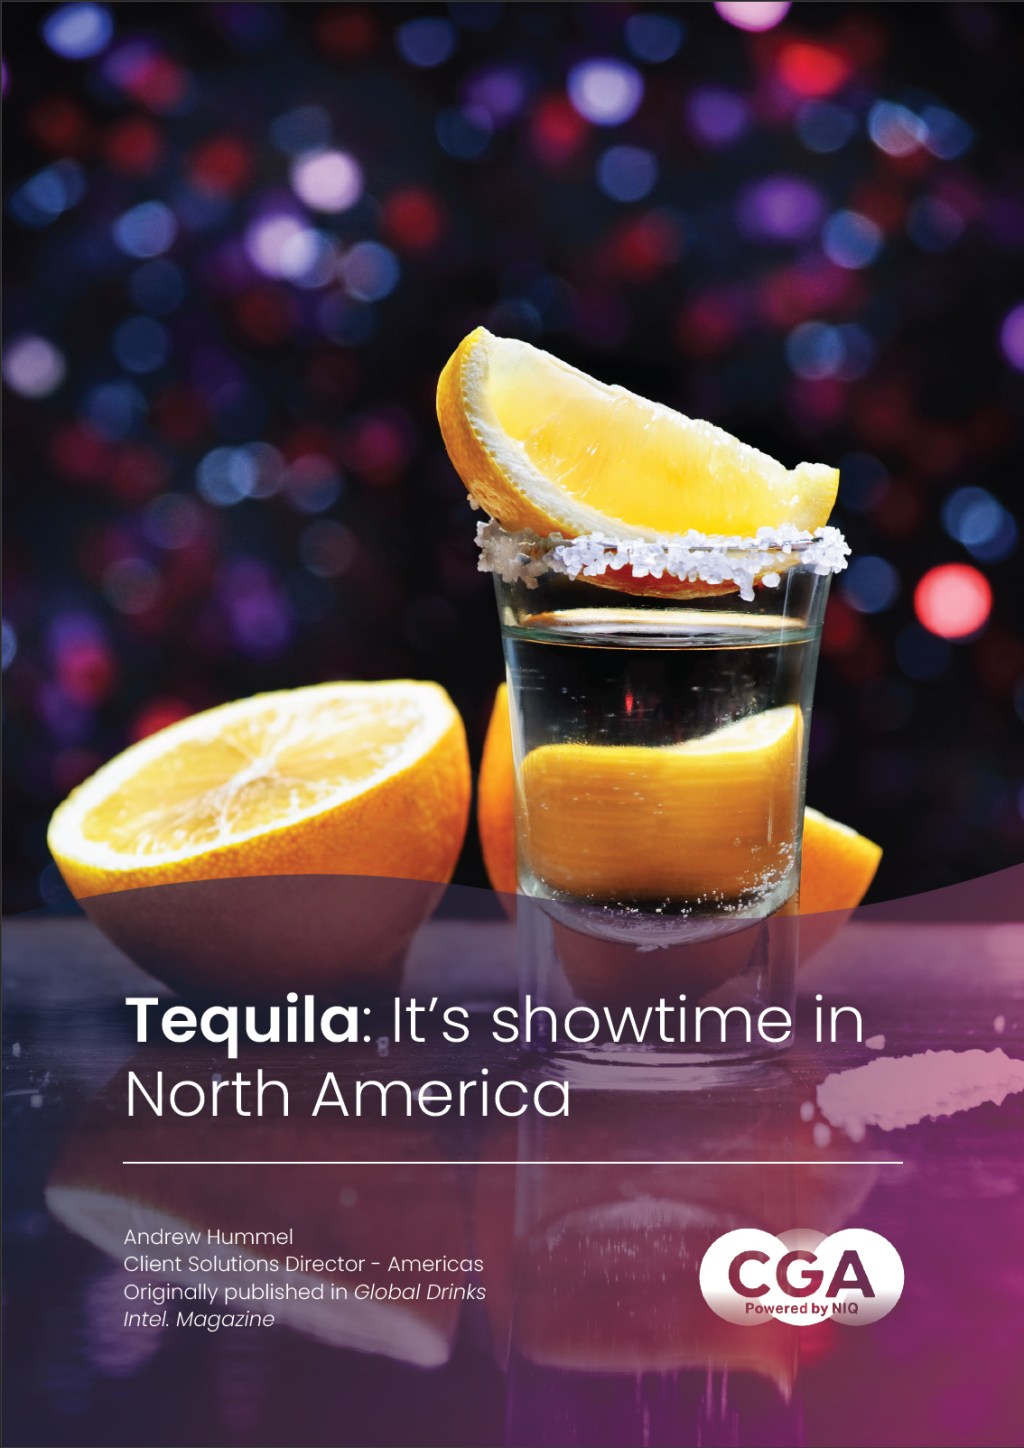 Tequila: It’s showtime in North America